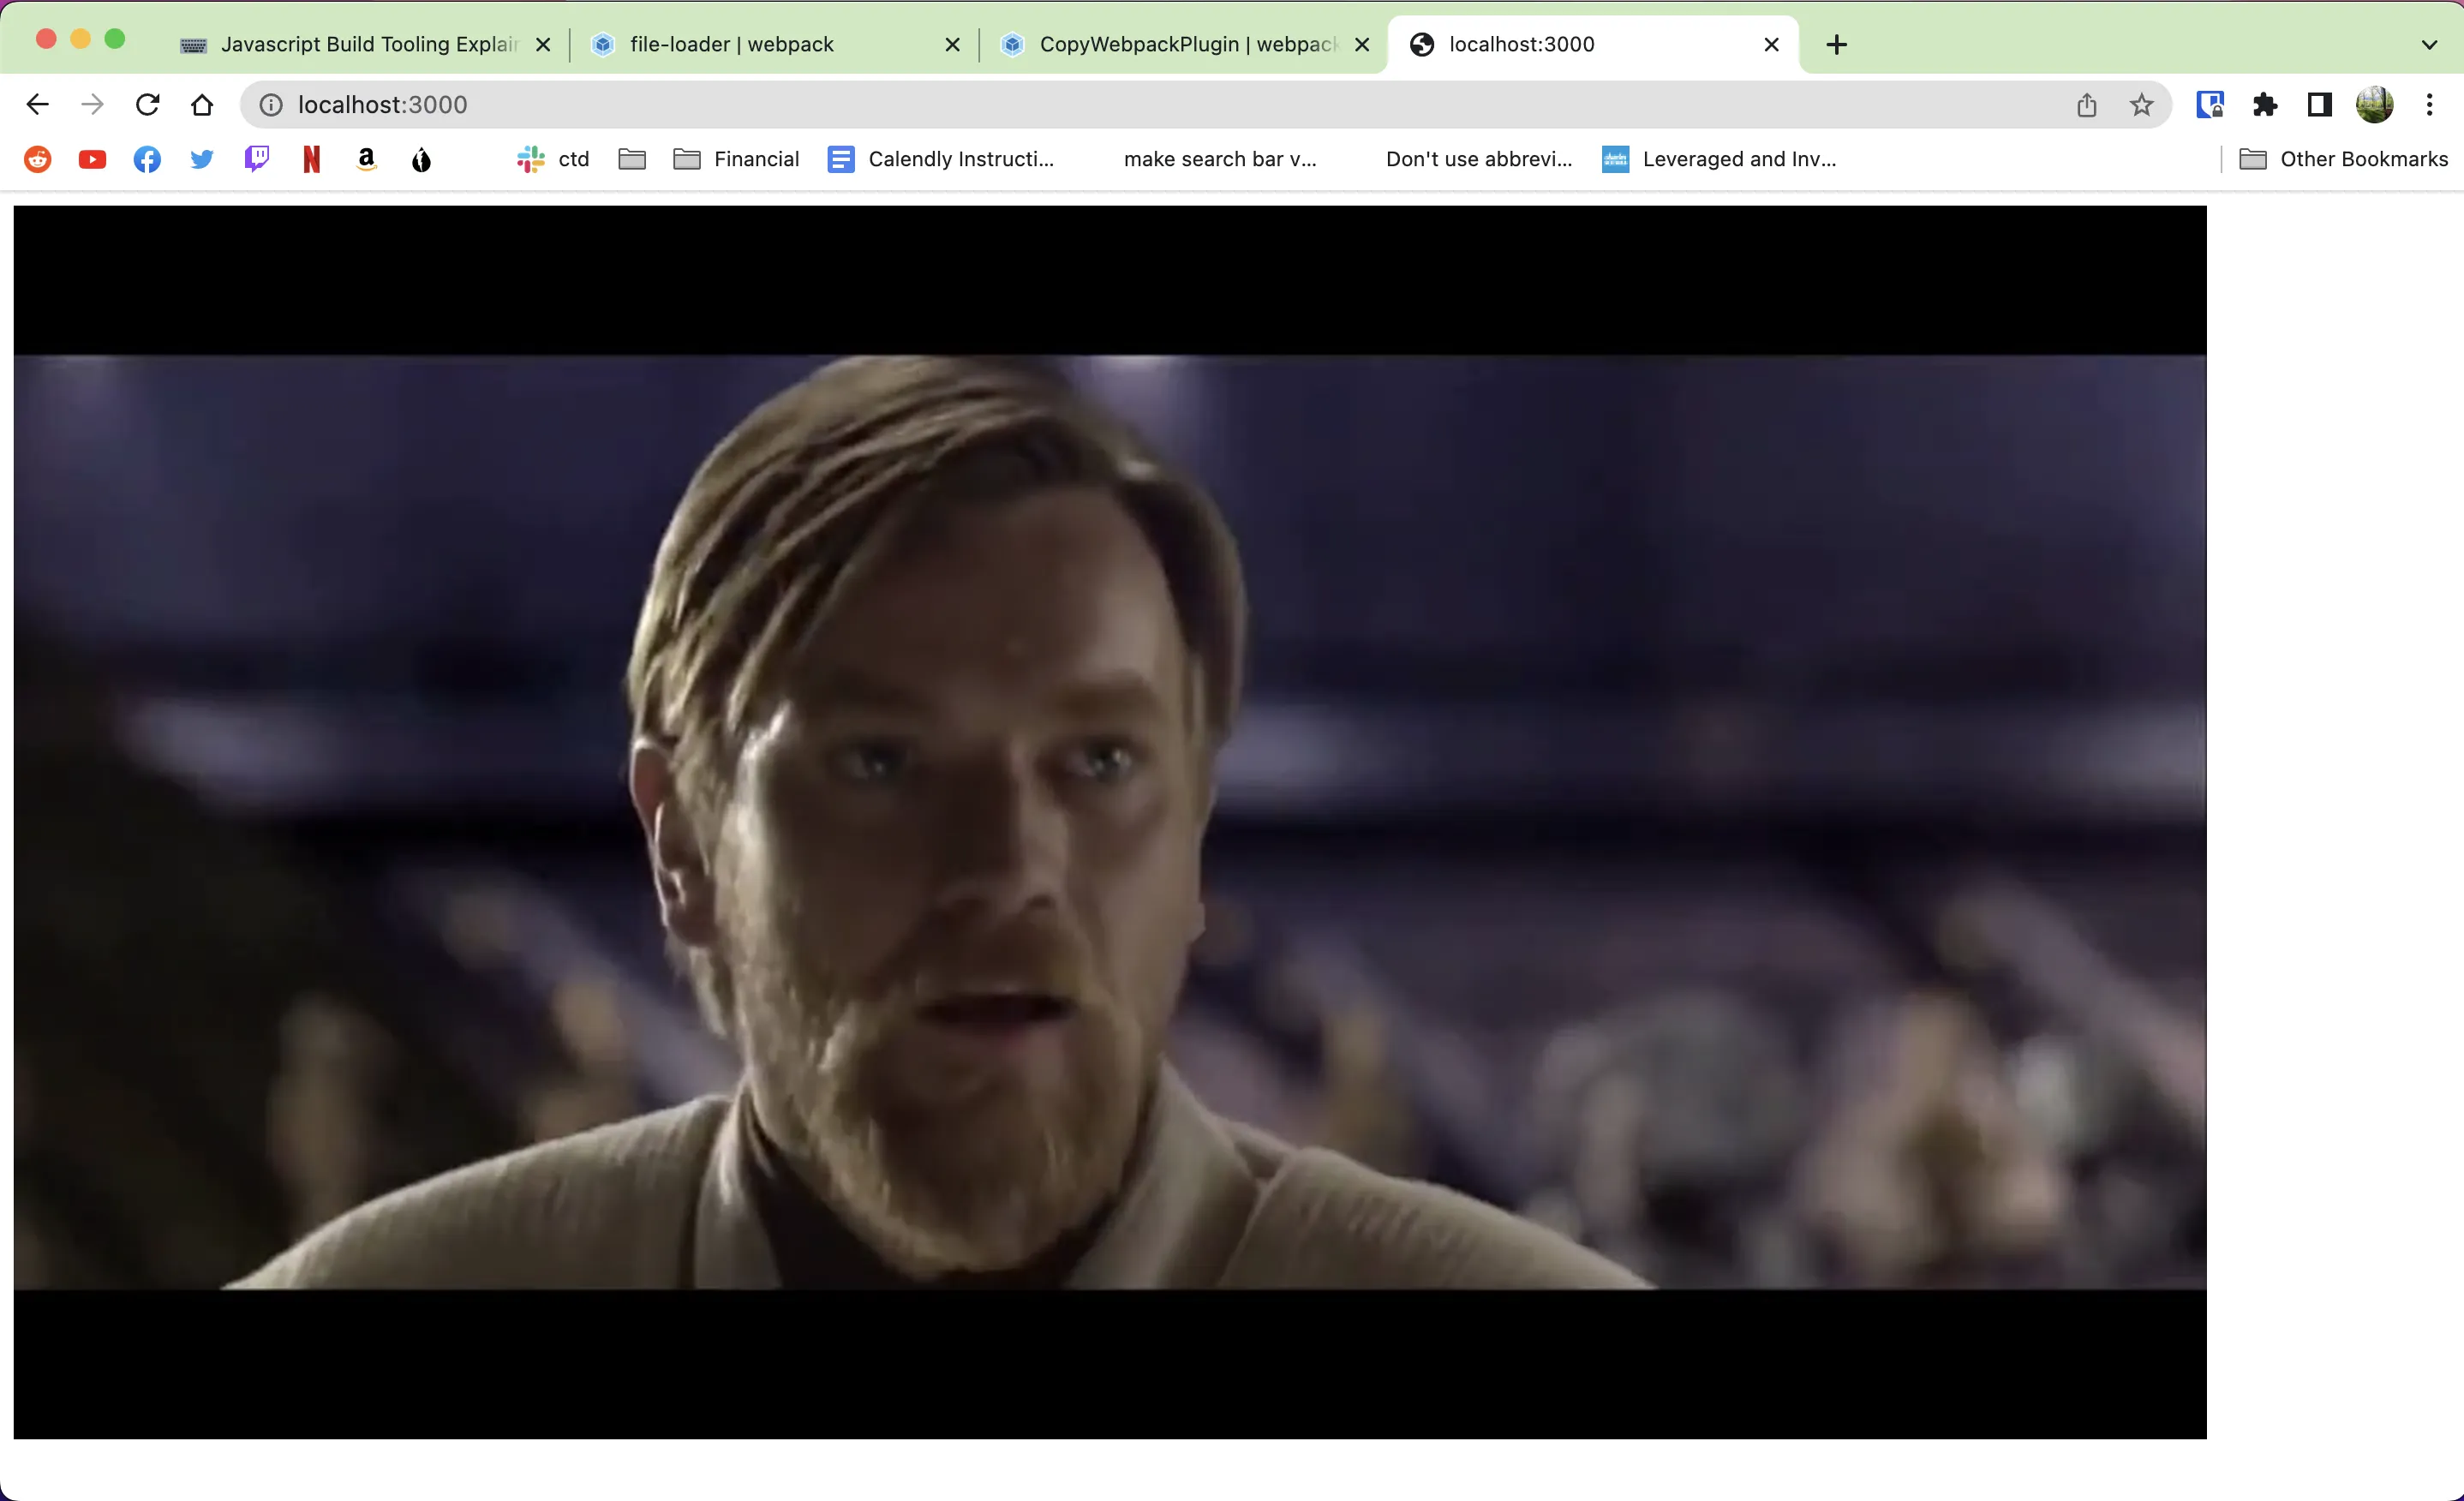 Our picture of Obi-Wan, loaded into the static site we created